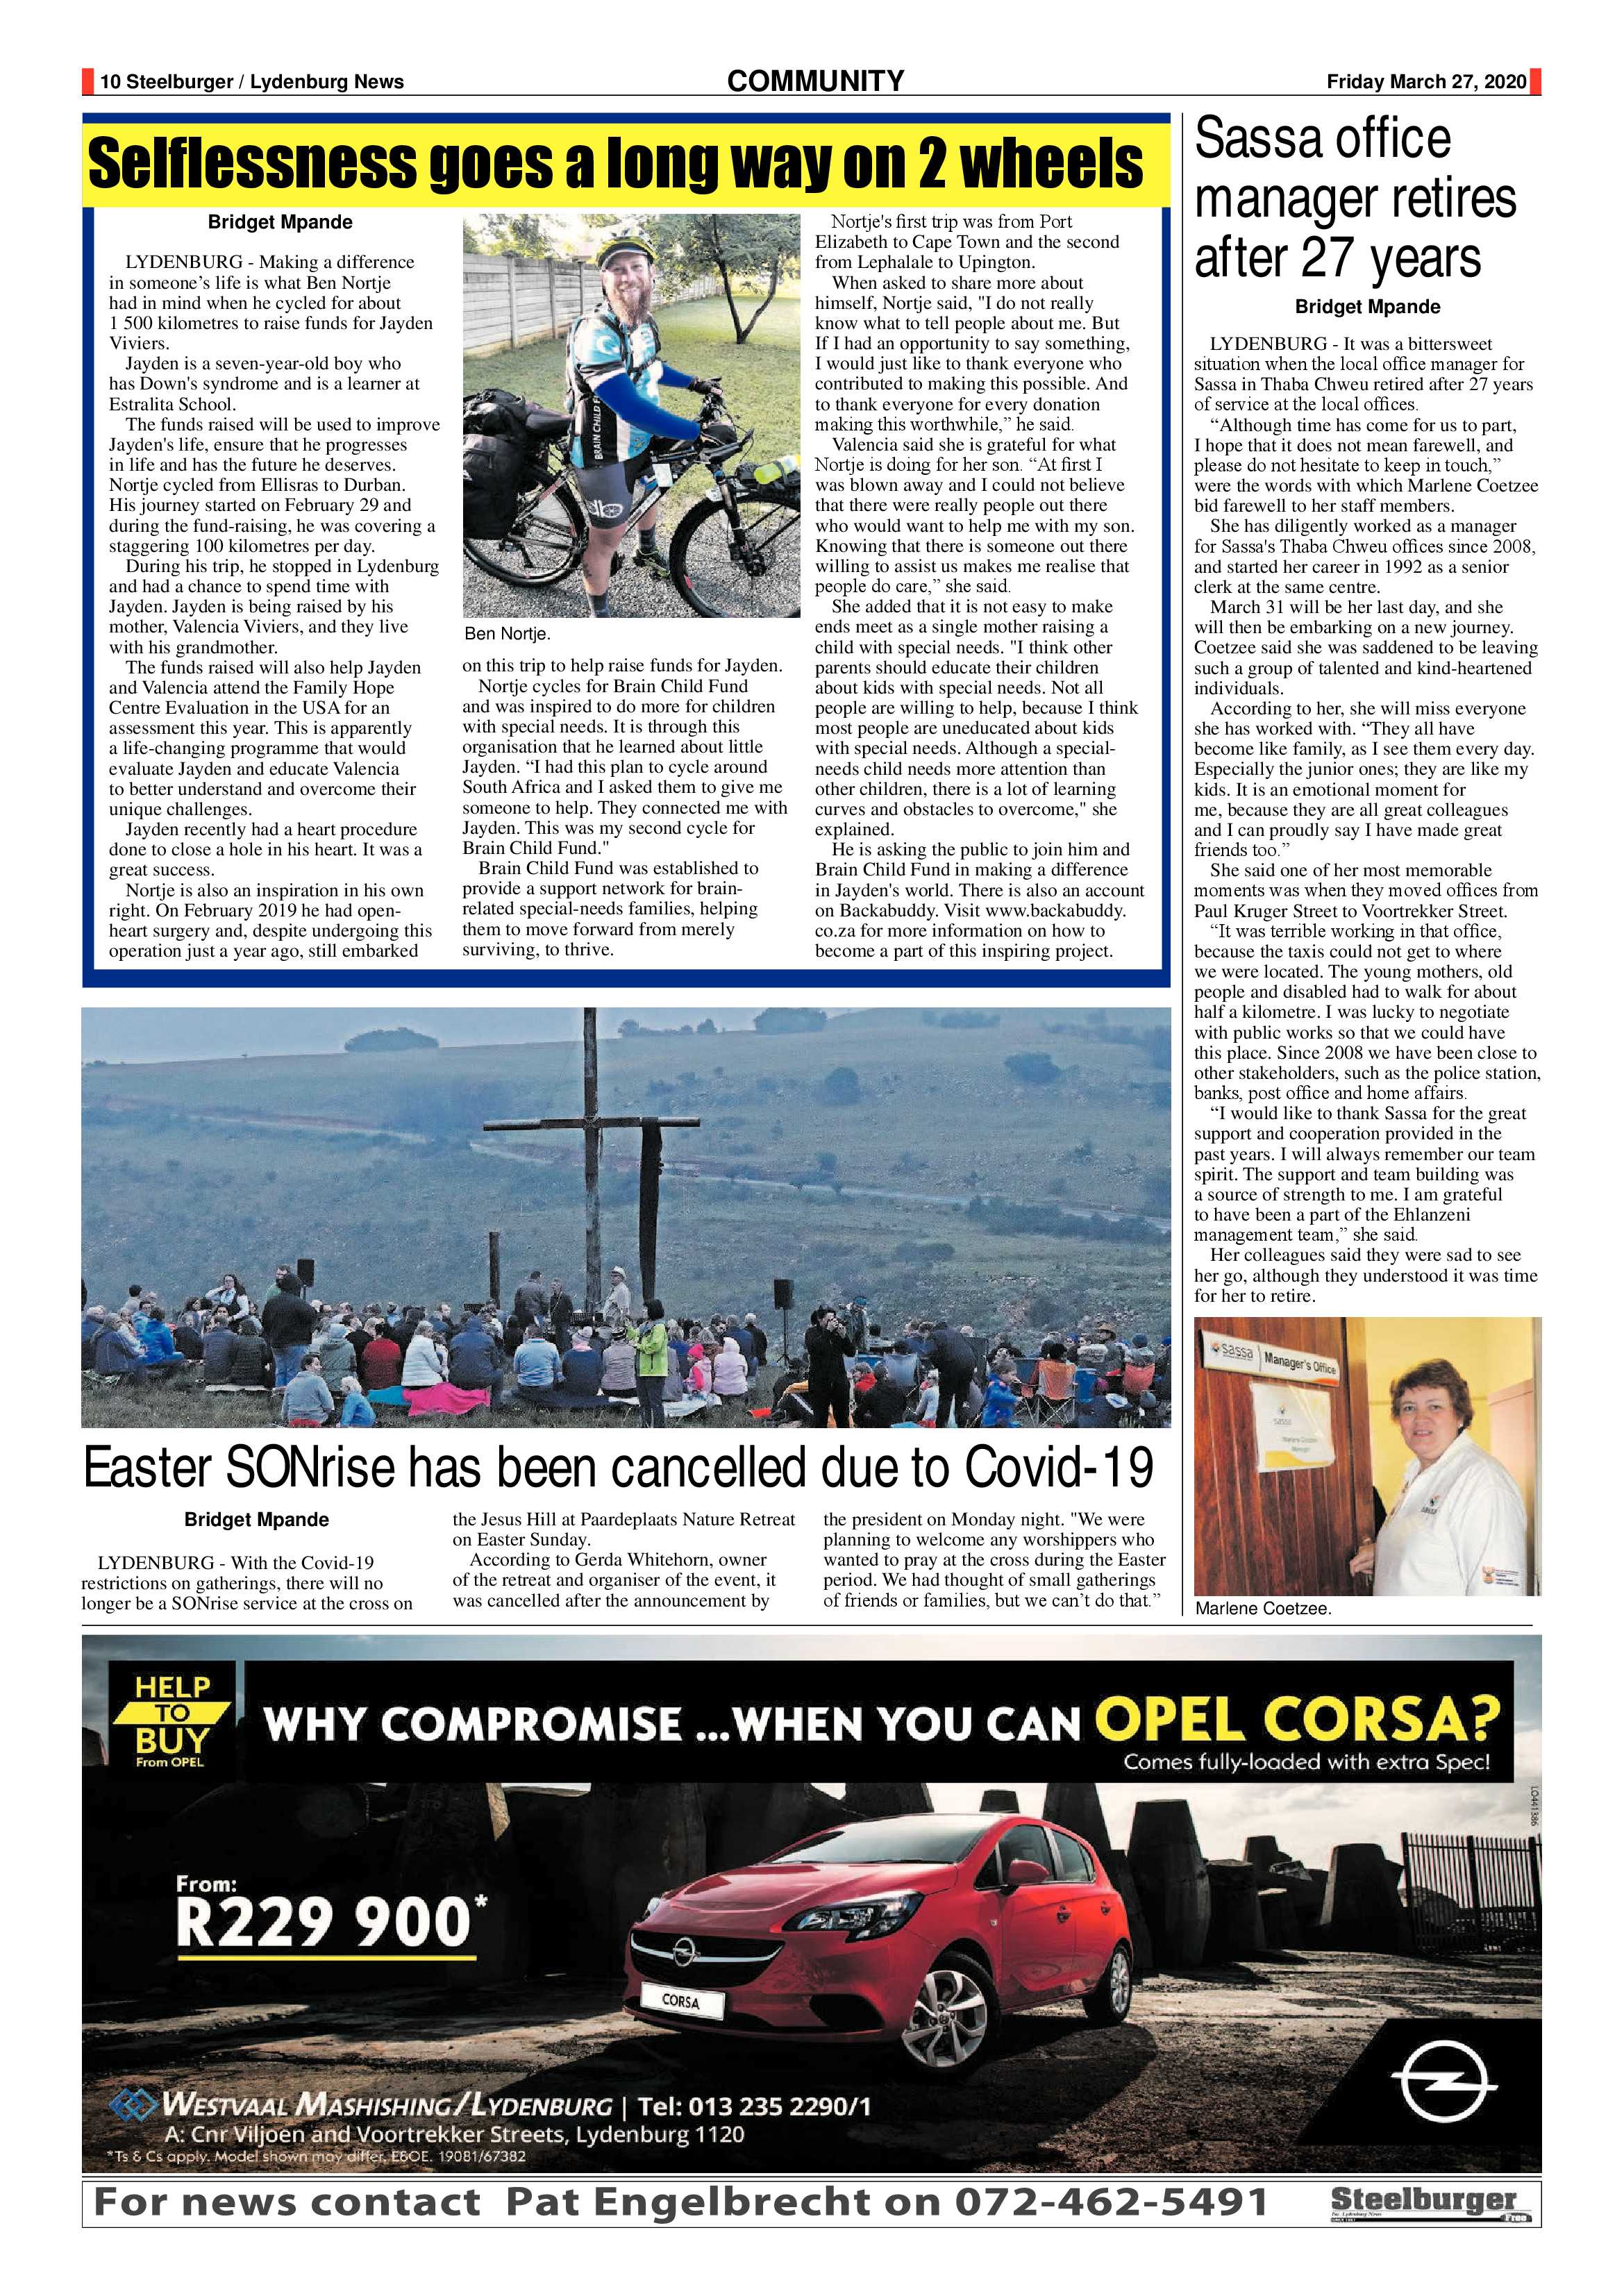 Steelburger 27 March 2020 page 10